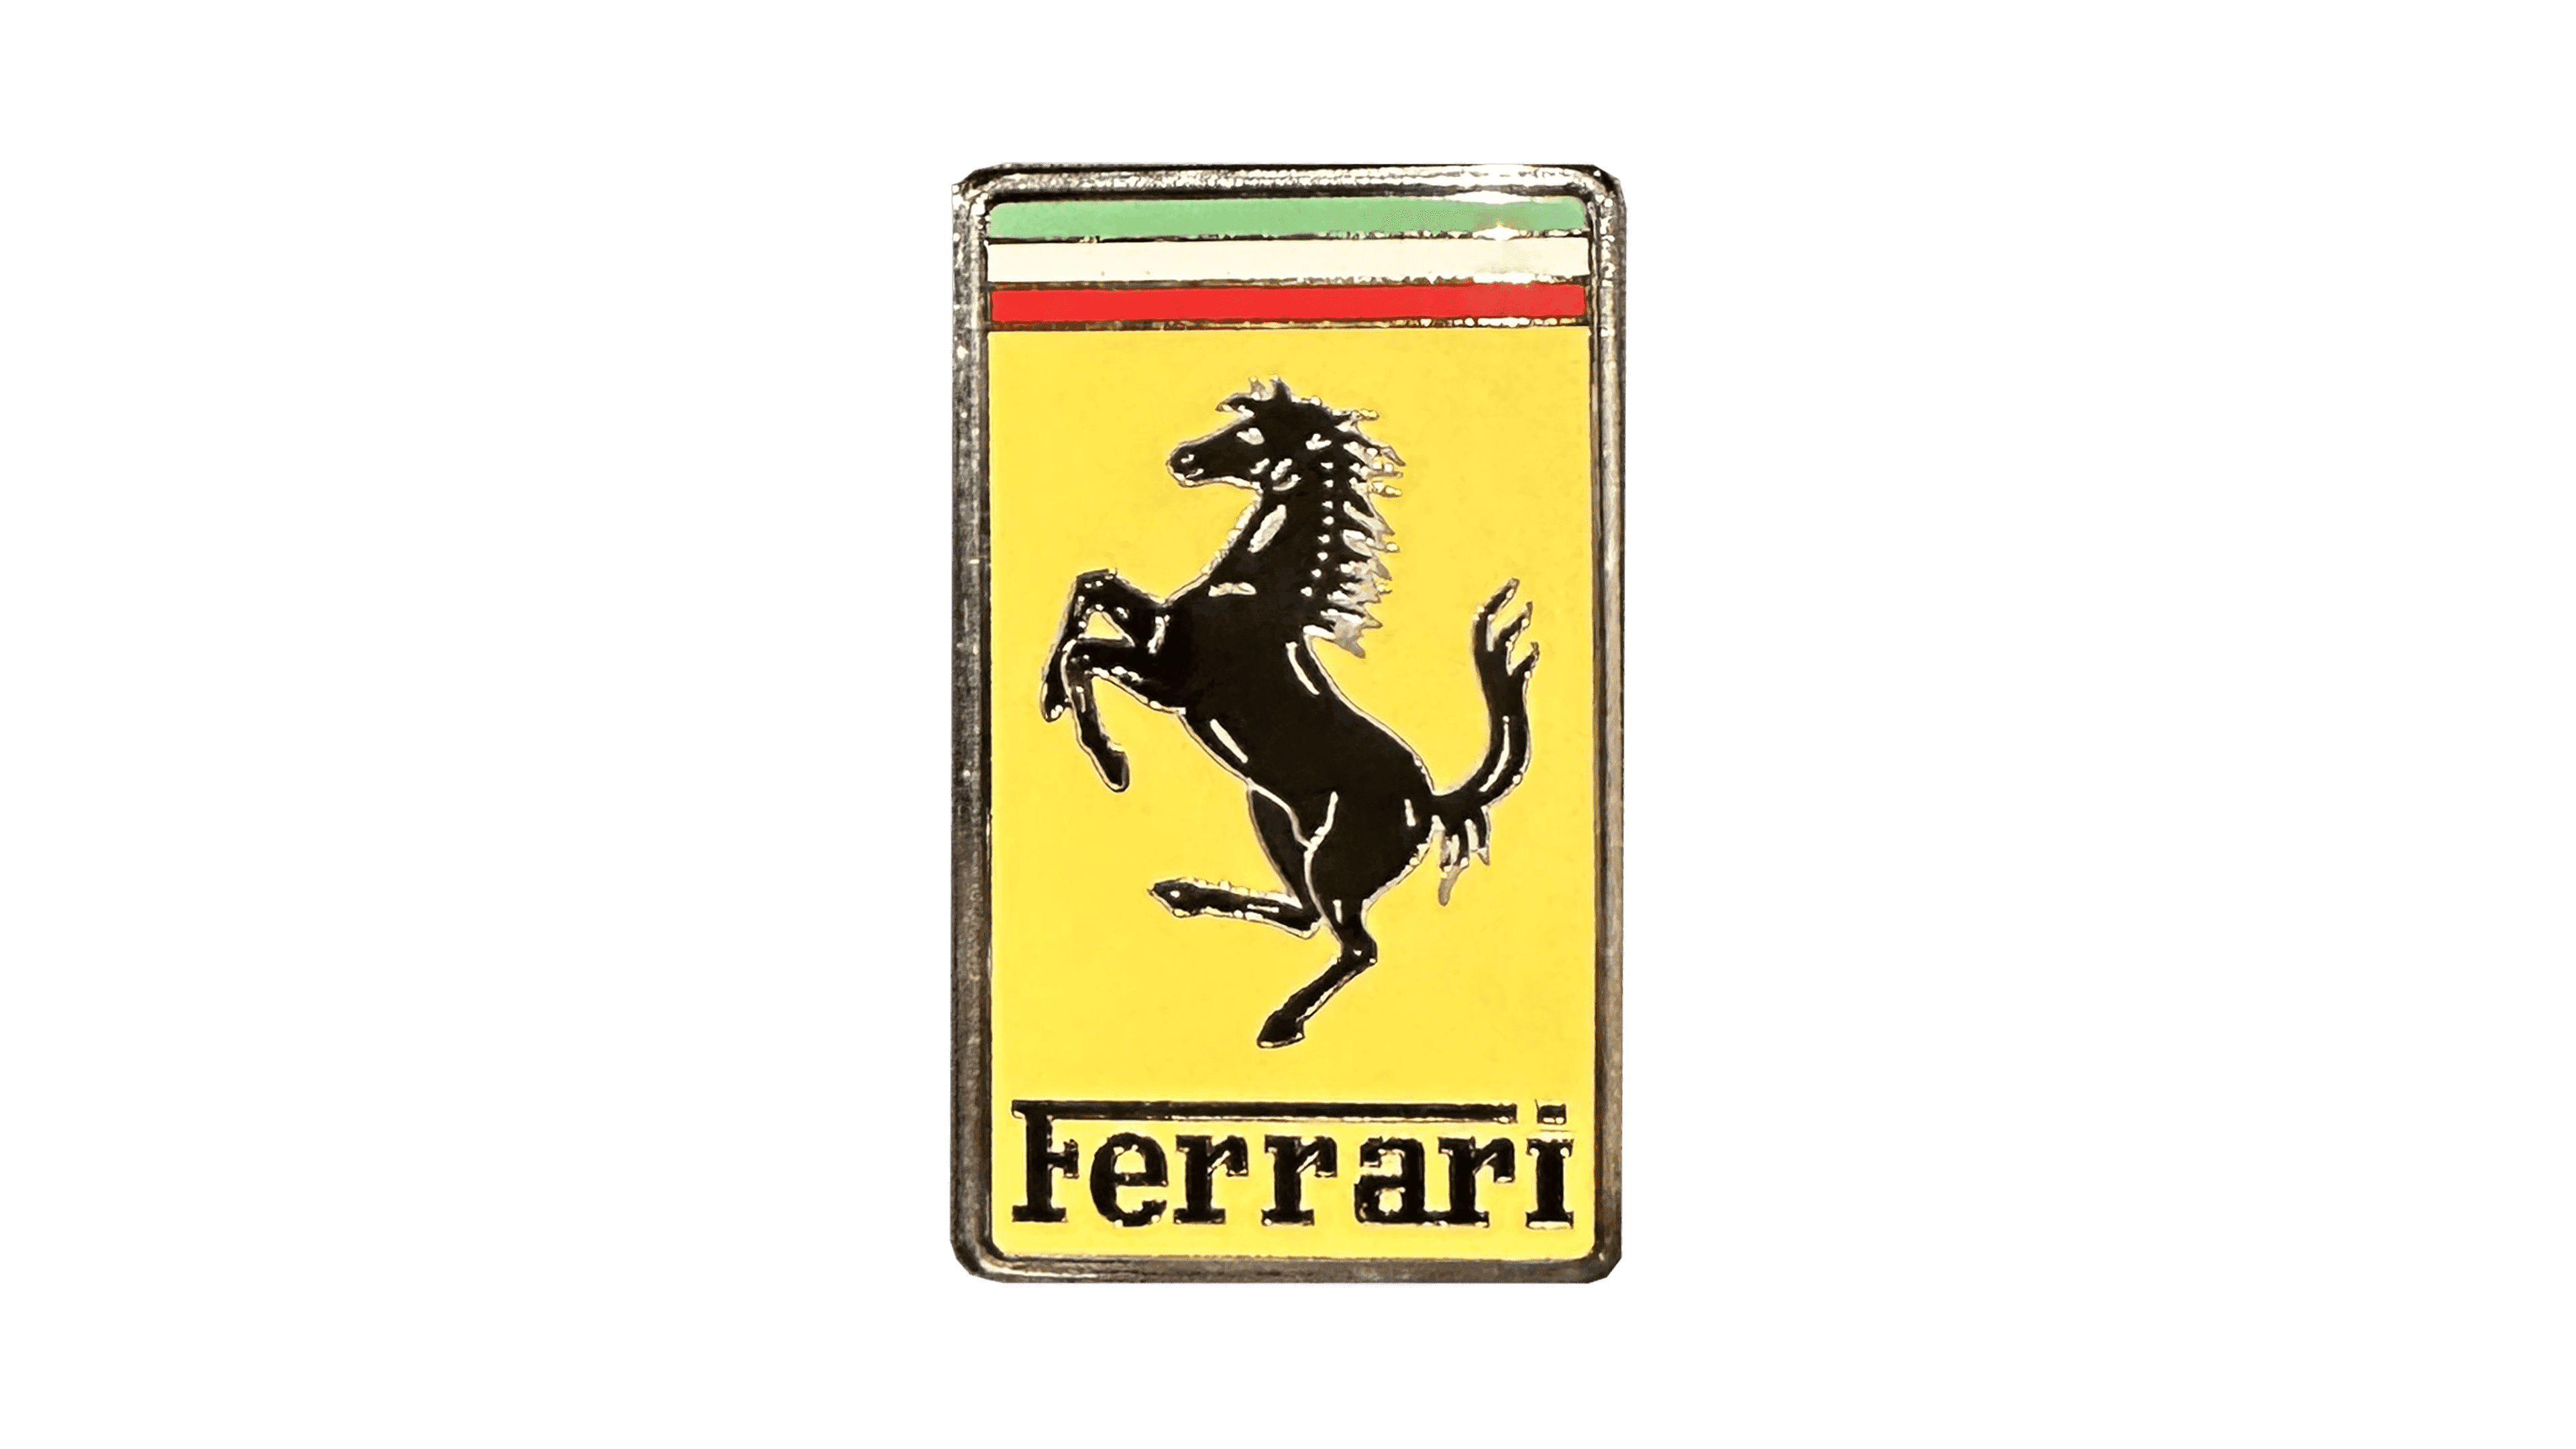 Ferrari logo and the history behind the car